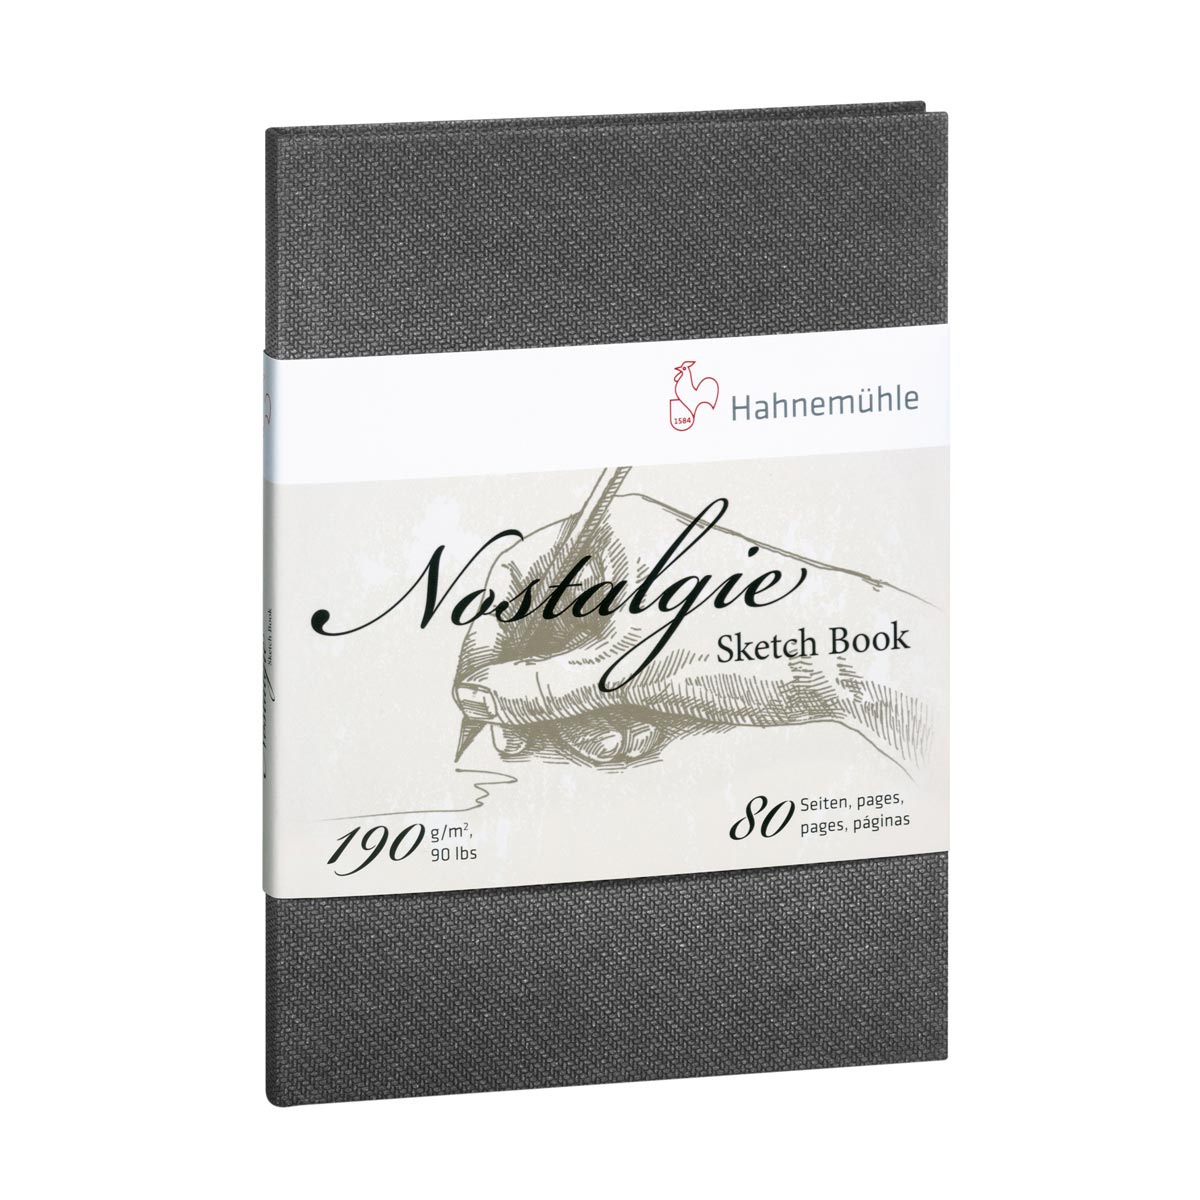 Hahnemuhle - Nostalgie Sketch Book - A4 190GSM - Ritratto